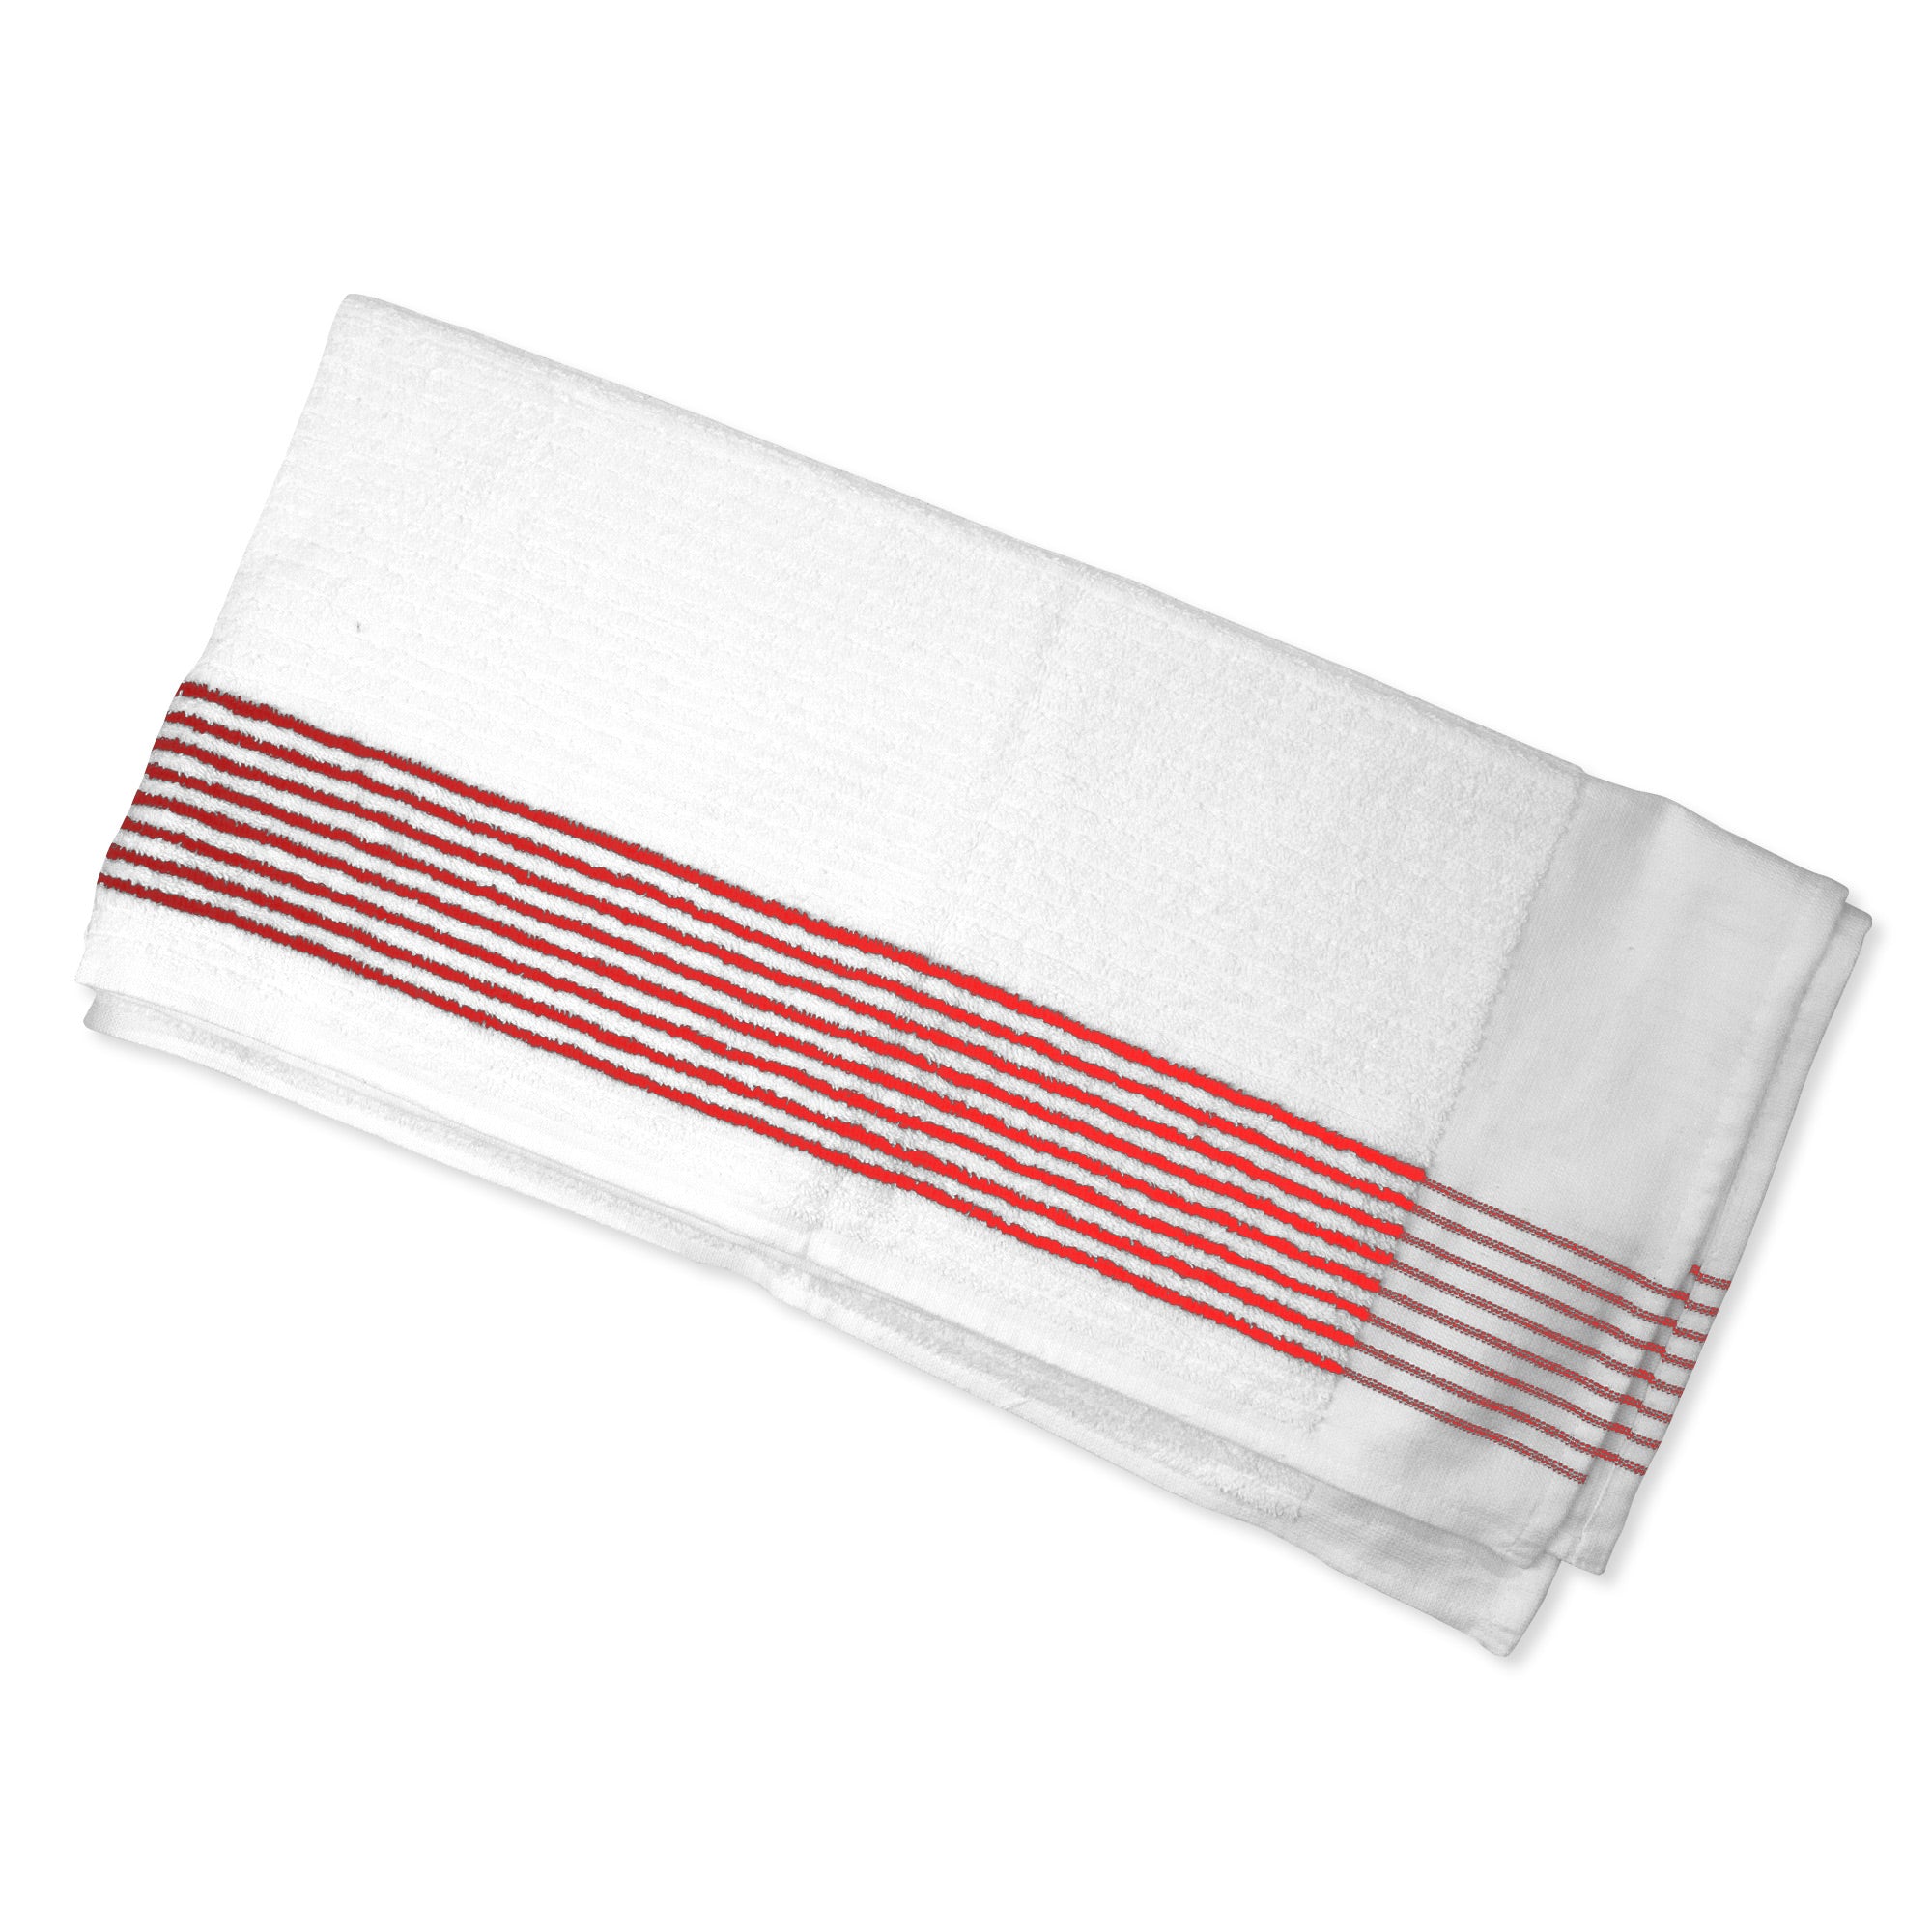 Top View of the Caddy Golf Towel with Red Stripes from Cayce (2445375832143)